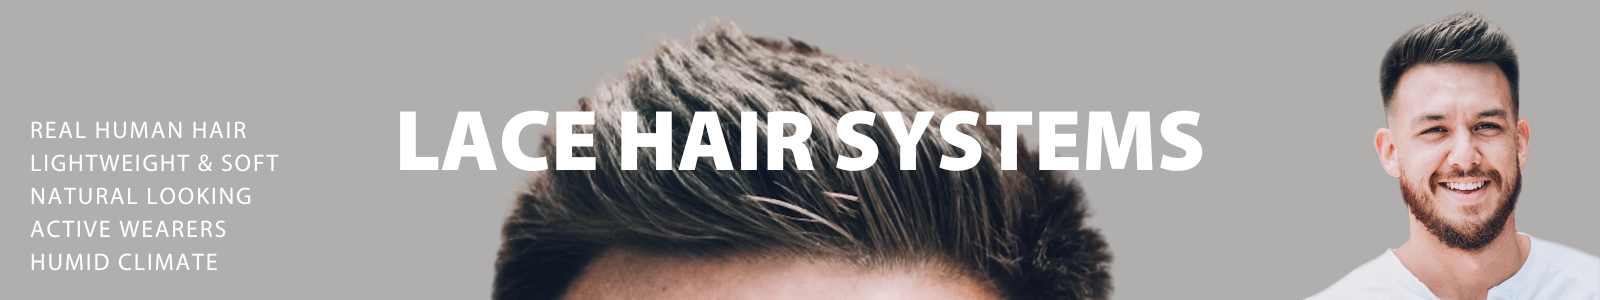 YOUR HAIR MATTERS | MEN'S LACE HAIR SYSTEMS | REAL HUMAN HAIR SYSTEMS | BENEFITS OF MEN'S LACE HAIR SYSTEMS | MALE PATTERN BALDNESS | MALE HAIR LOSS | ALOPECIA